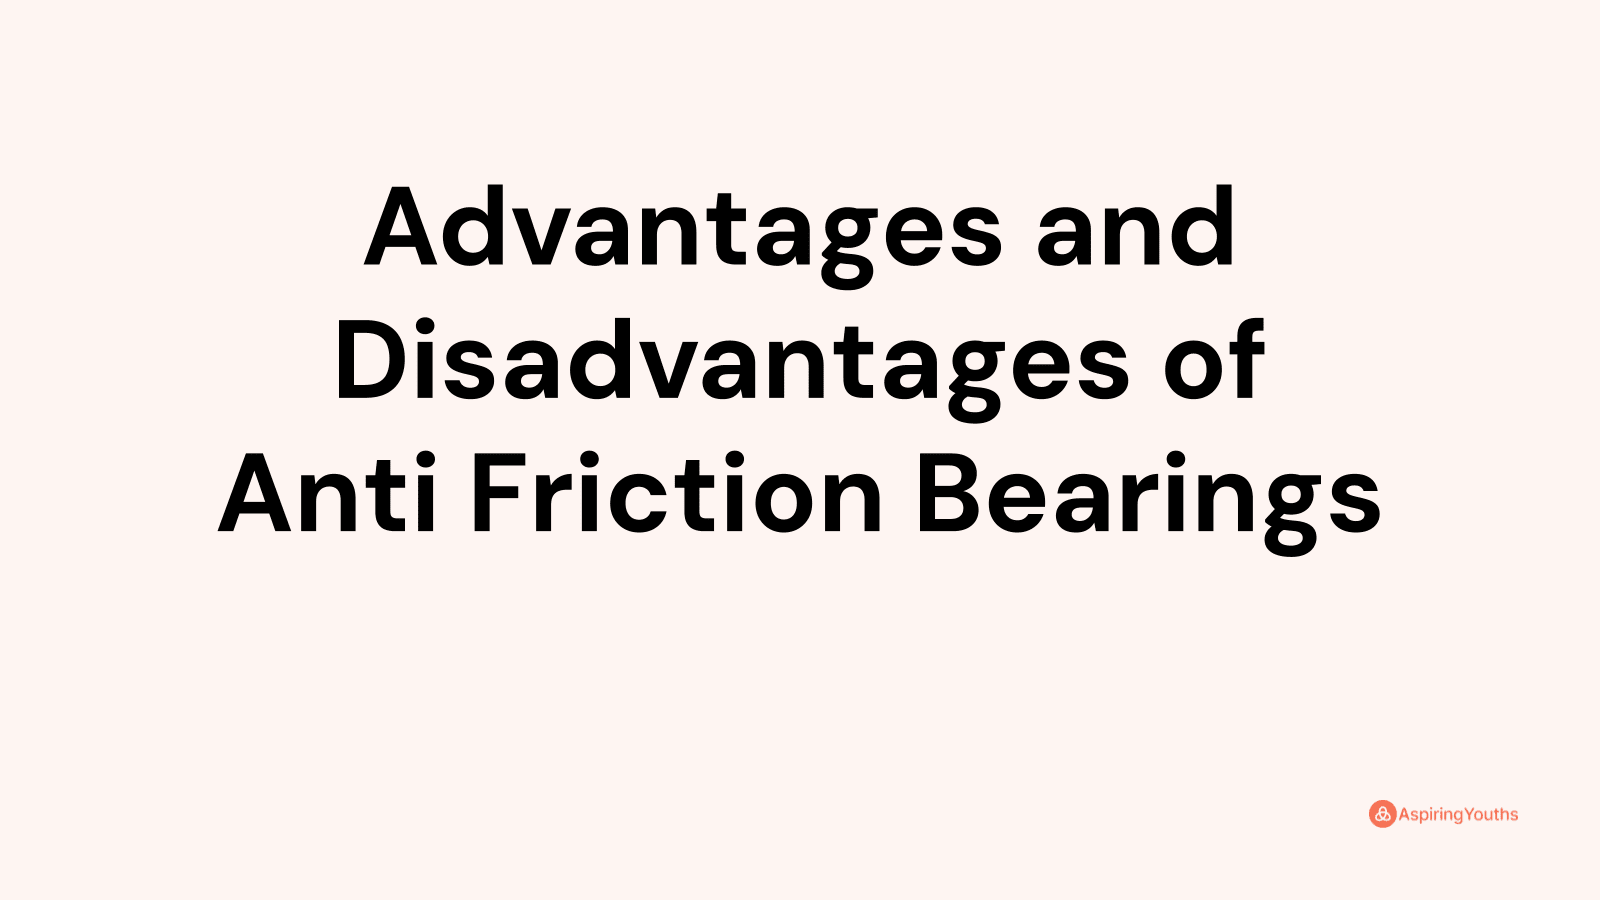 Advantages and disadvantages of Anti Friction Bearings